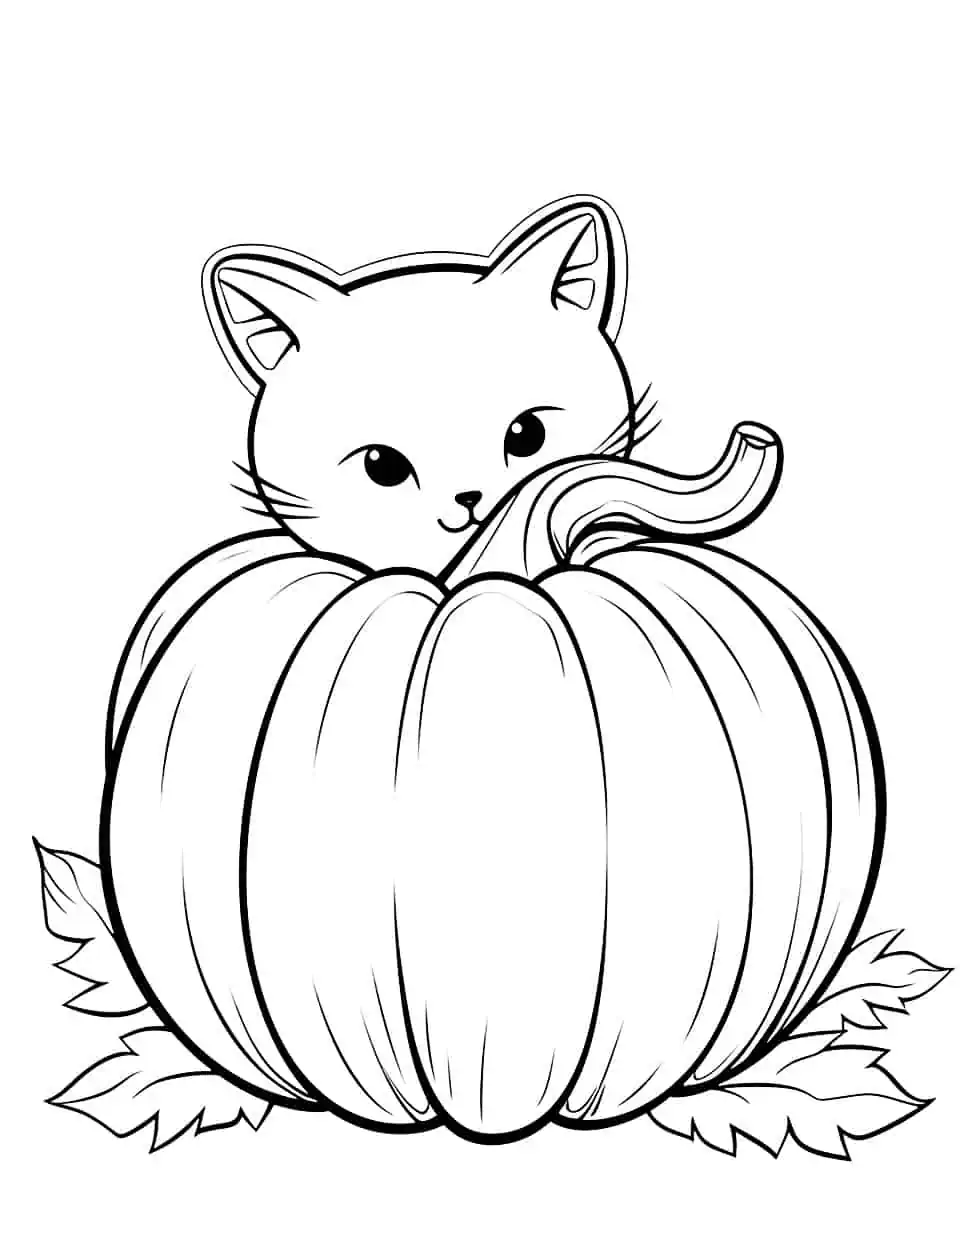 Pumpkin and Cat Coloring Page - A cute cat curled up beside a pumpkin. A sweet scenario for animal lovers.